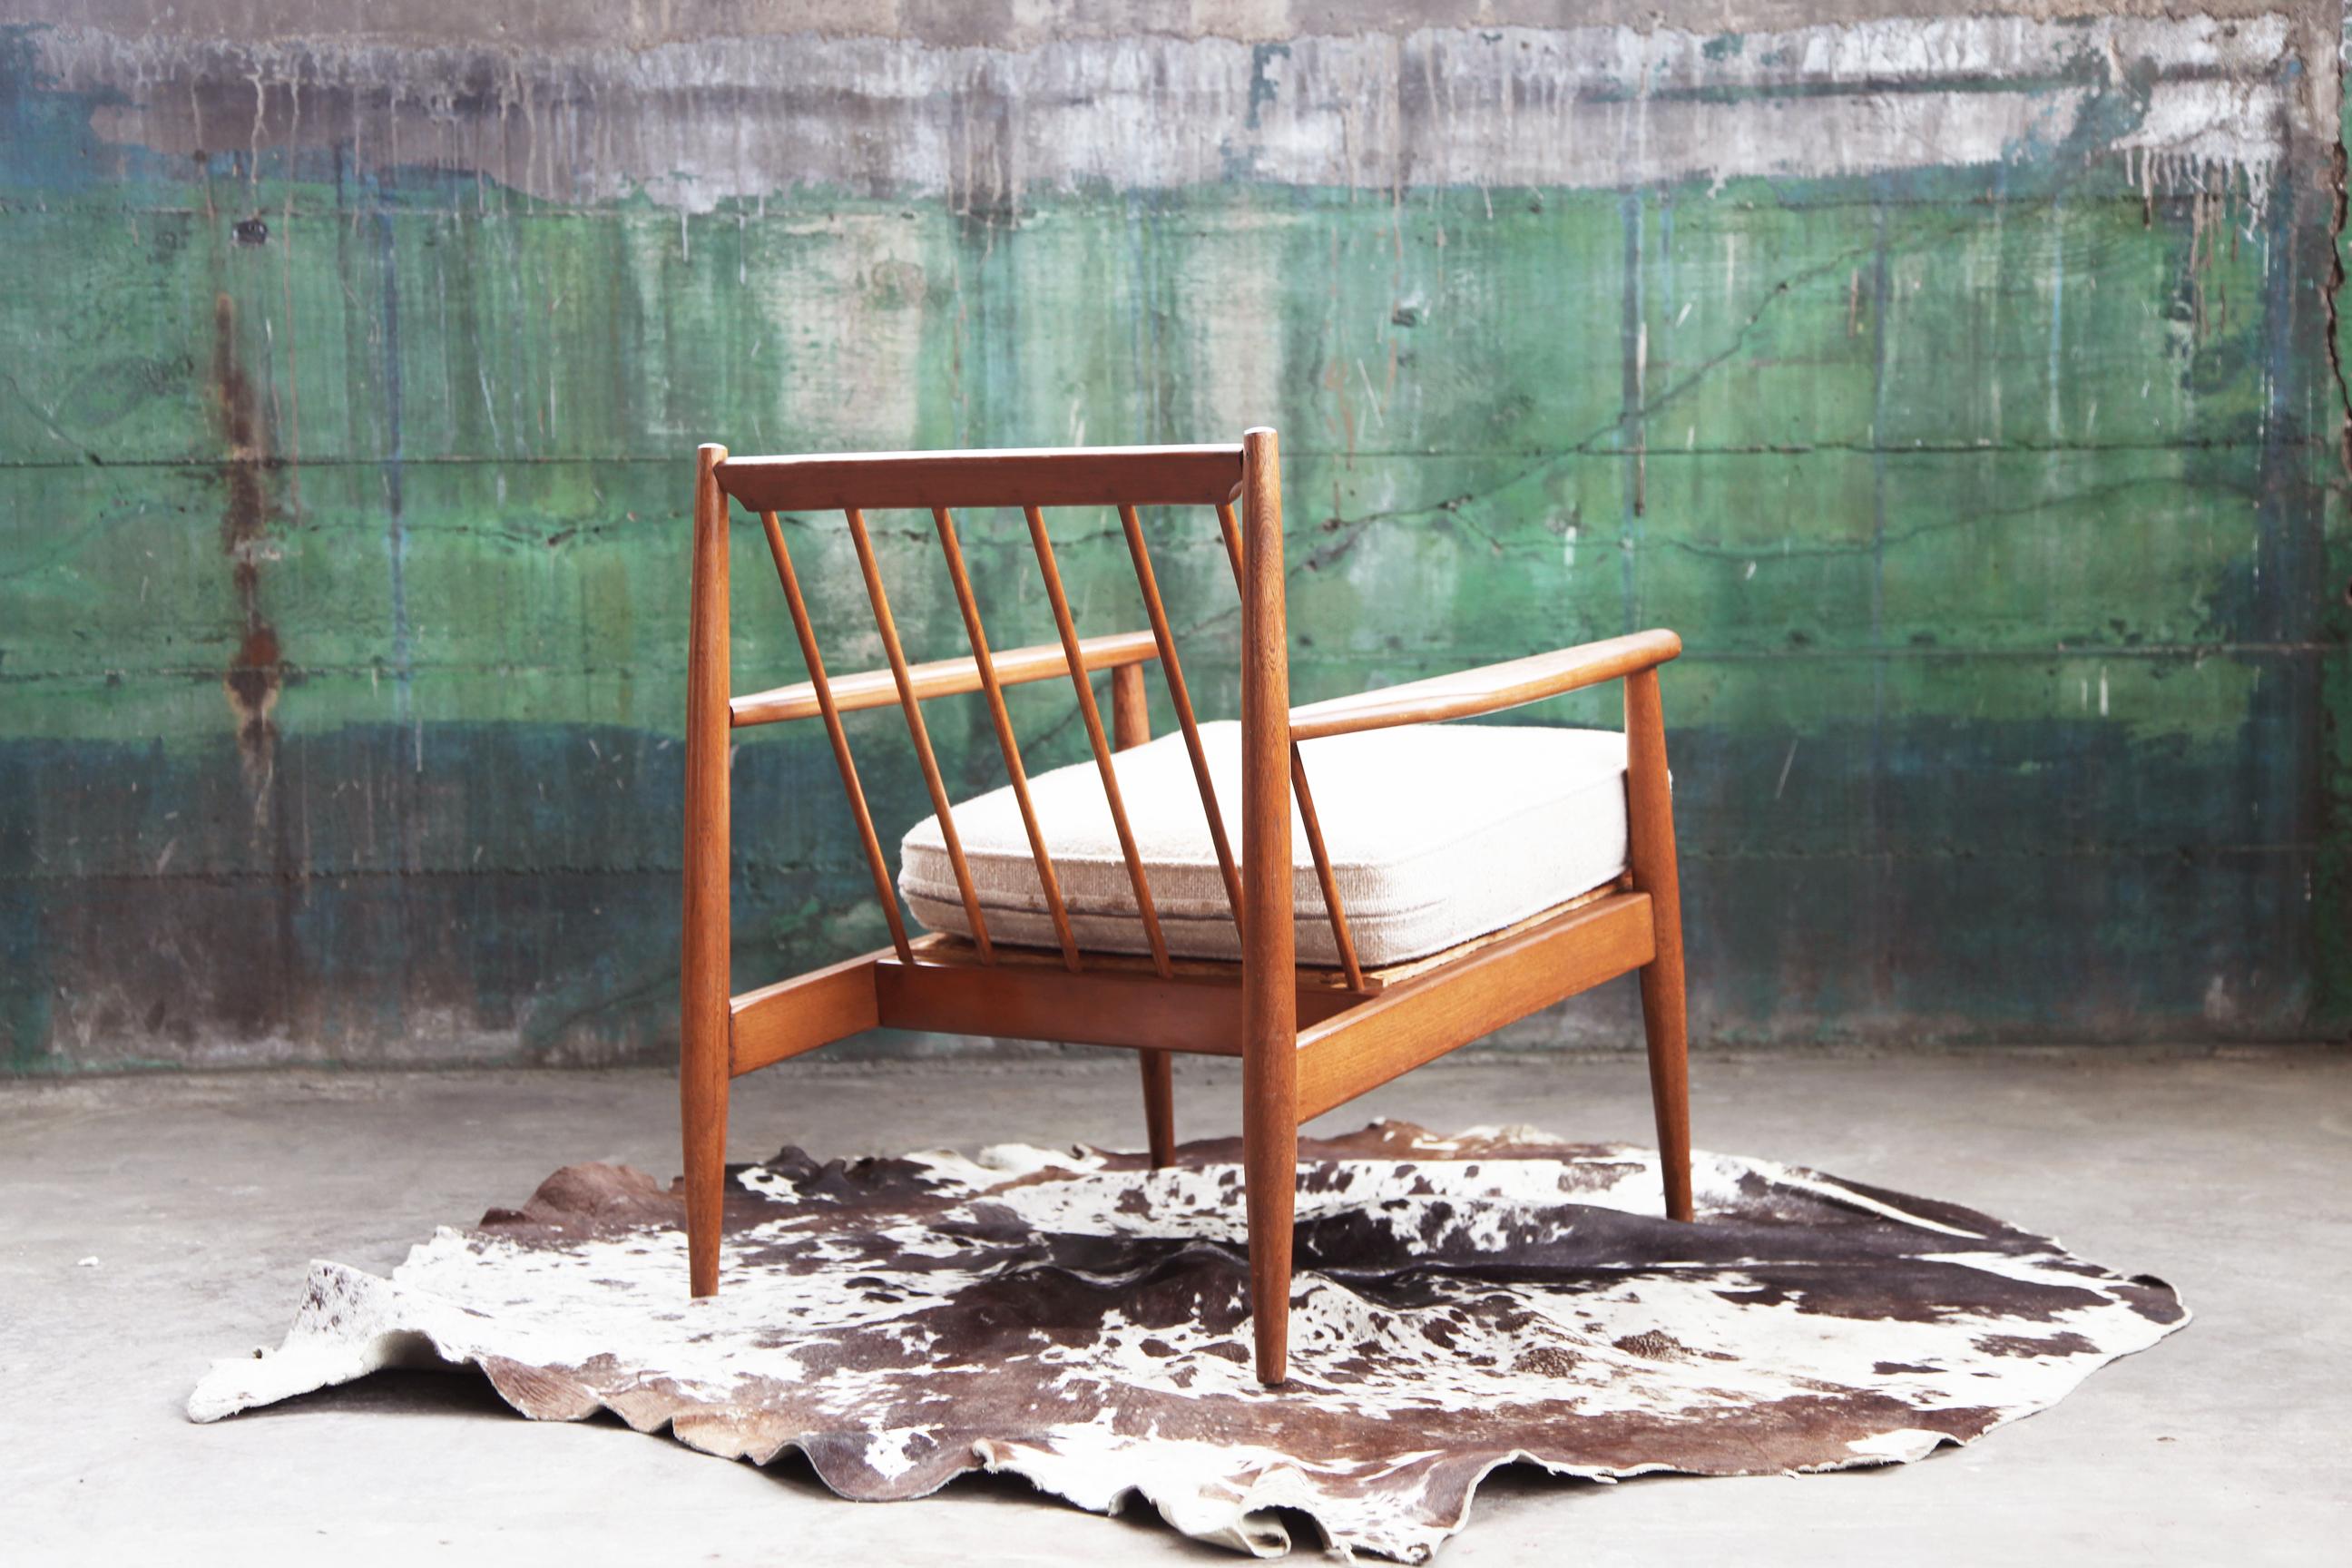 Sleek Sculptural Midcentury Danish Style Walnut Lounge Chair Frame In Good Condition For Sale In Madison, WI